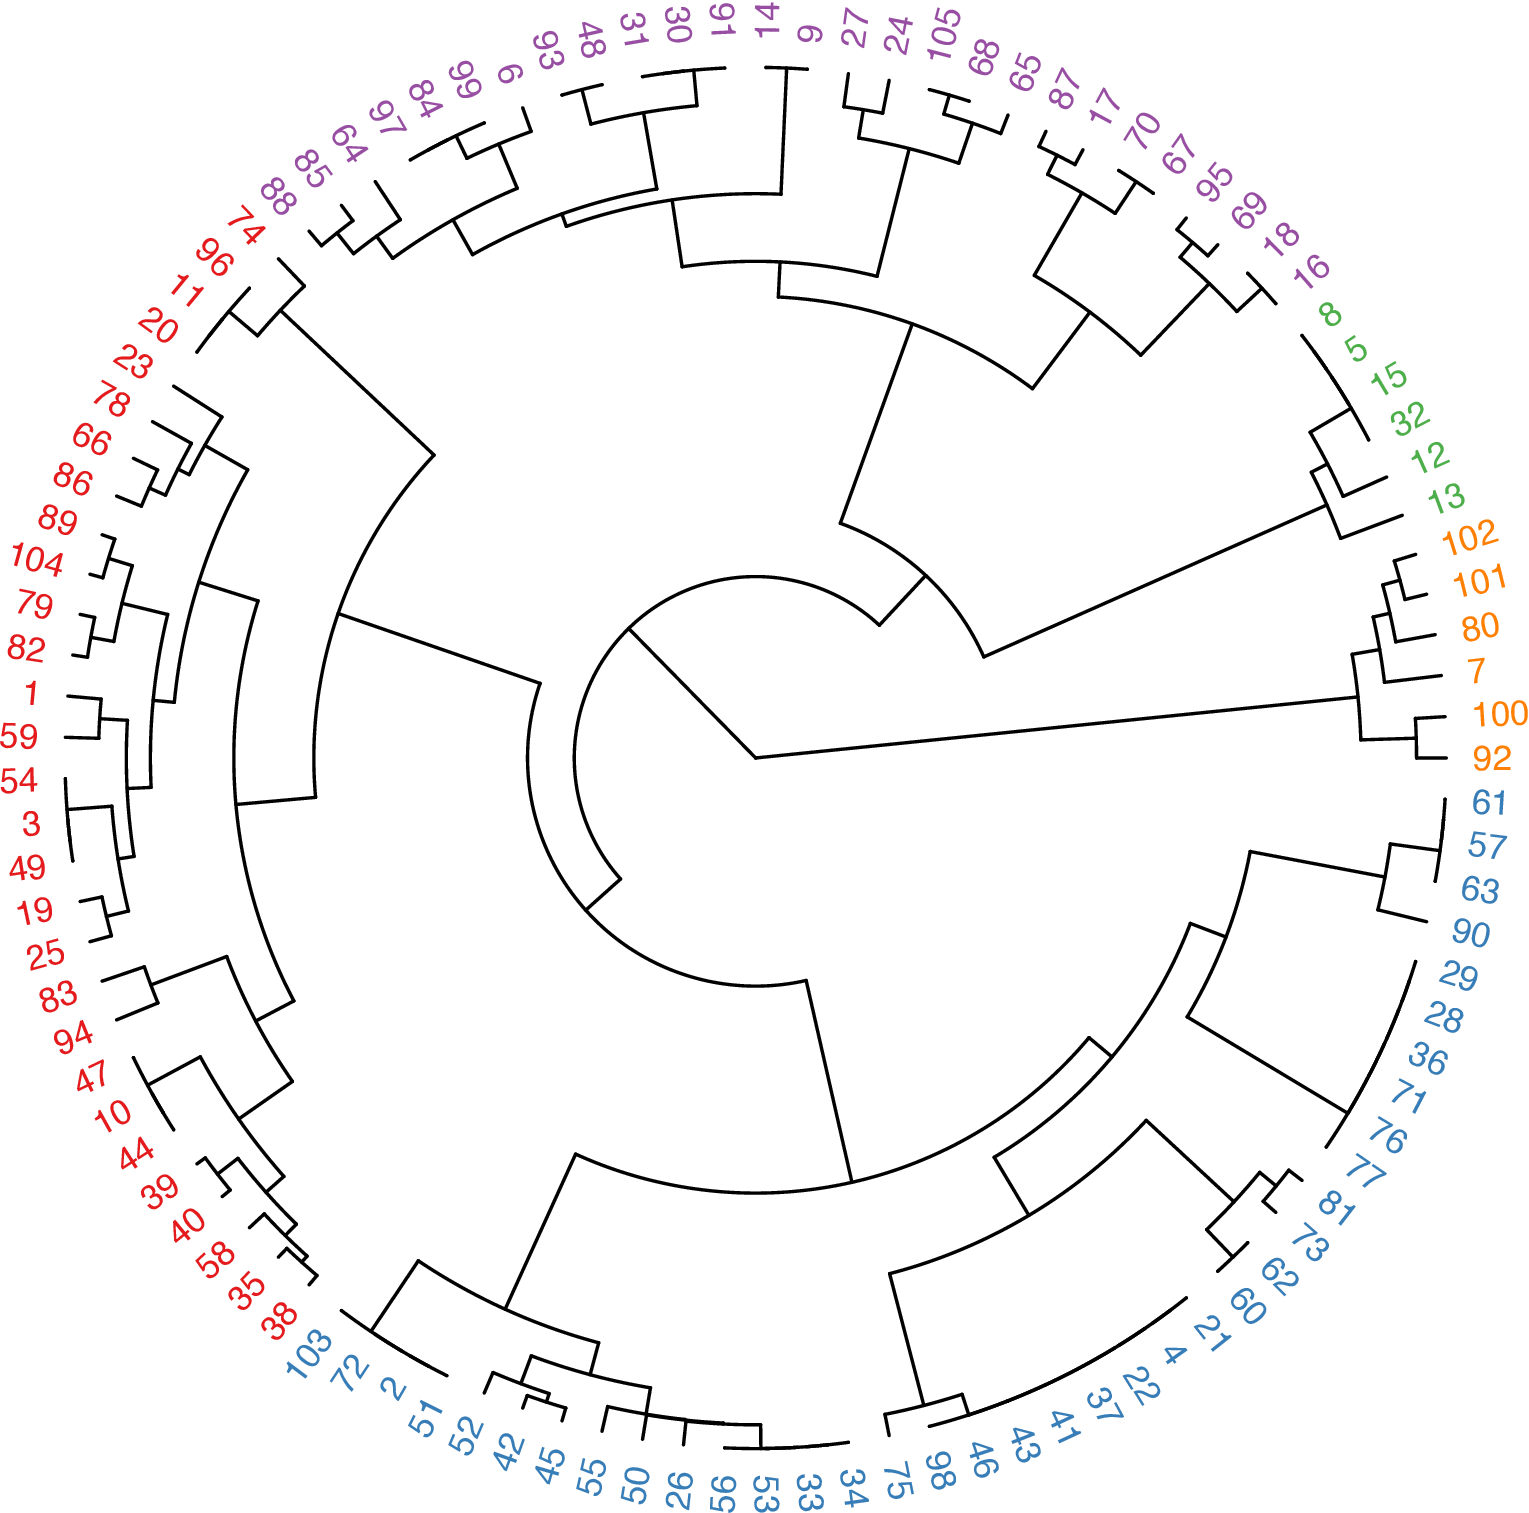 Figure 5: Tree visualization of the molecular clustering result.